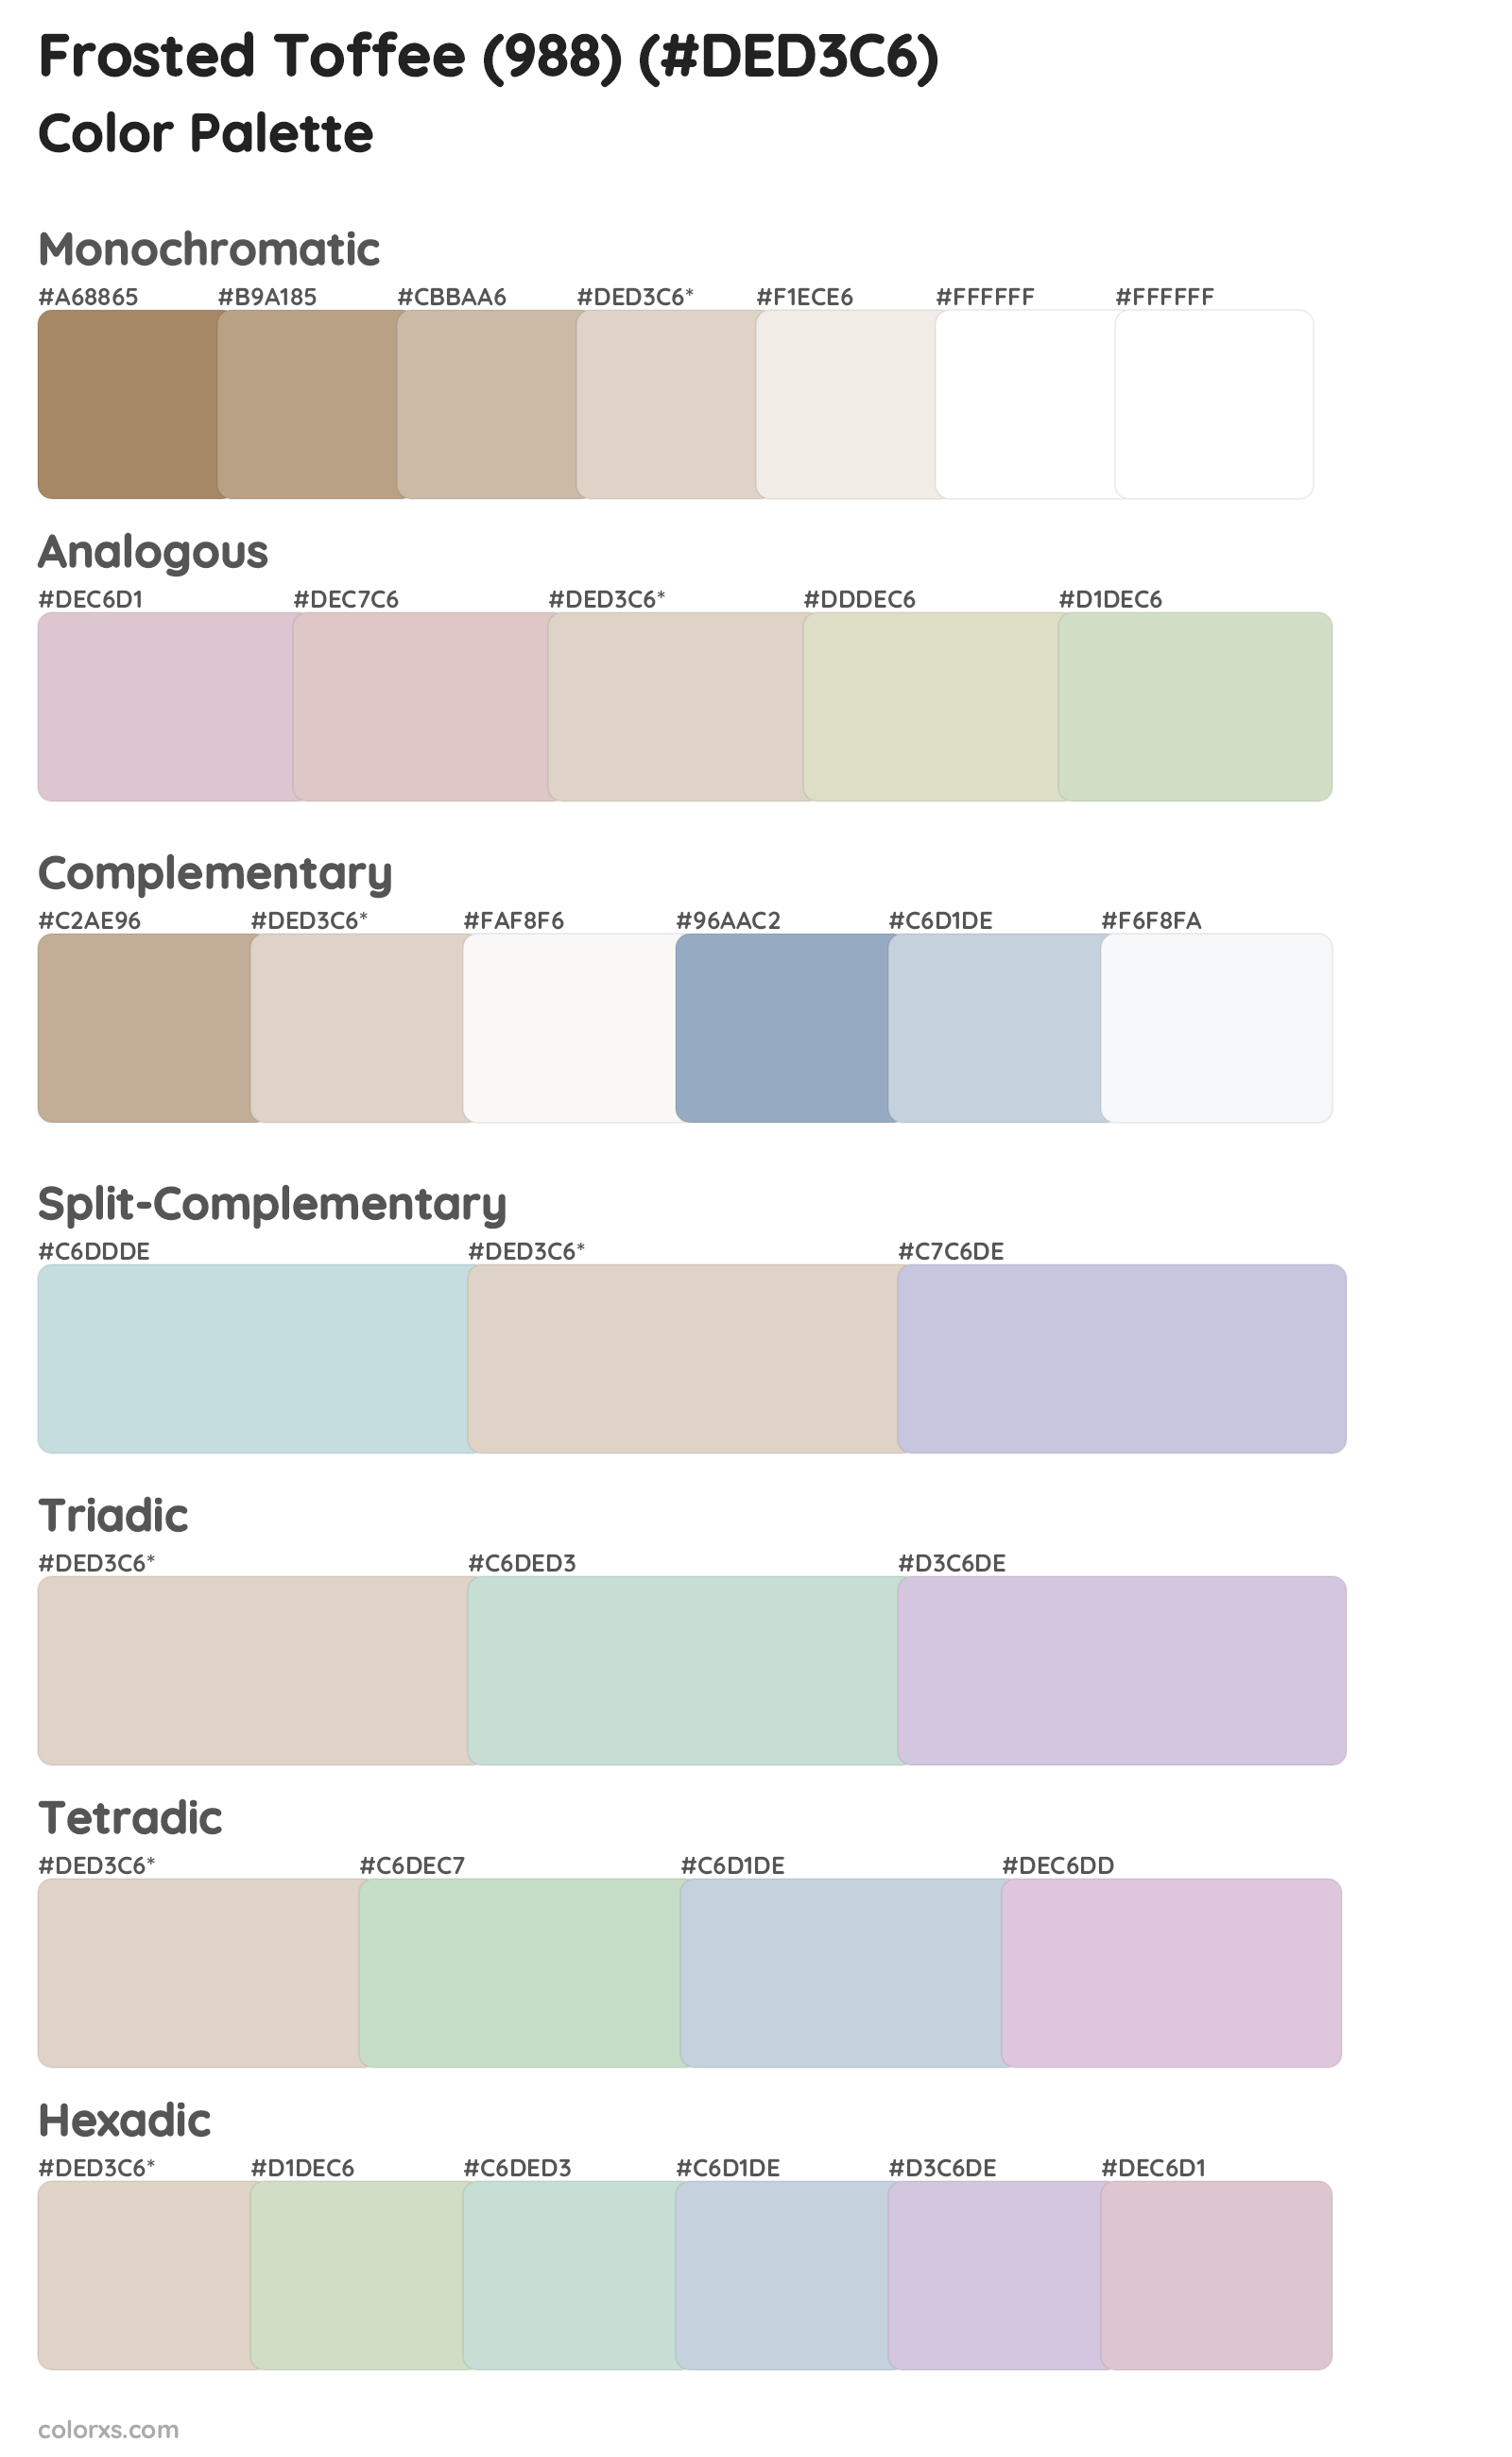 Frosted Toffee (988) Color Scheme Palettes